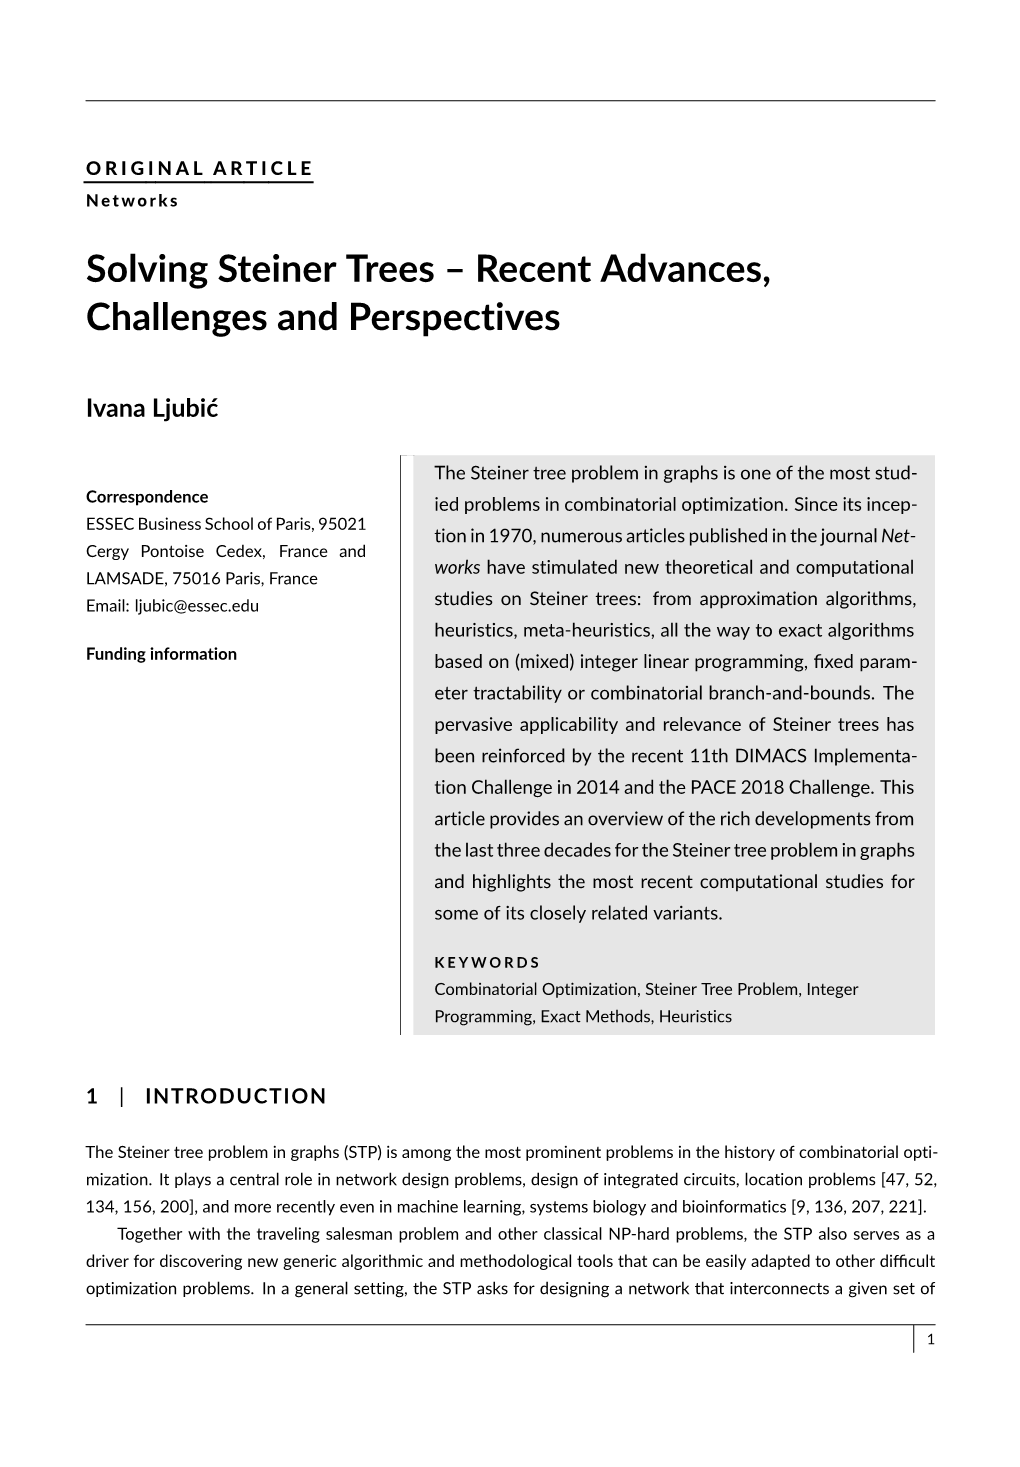 Solving Steiner Trees – Recent Advances, Challenges and Perspectives